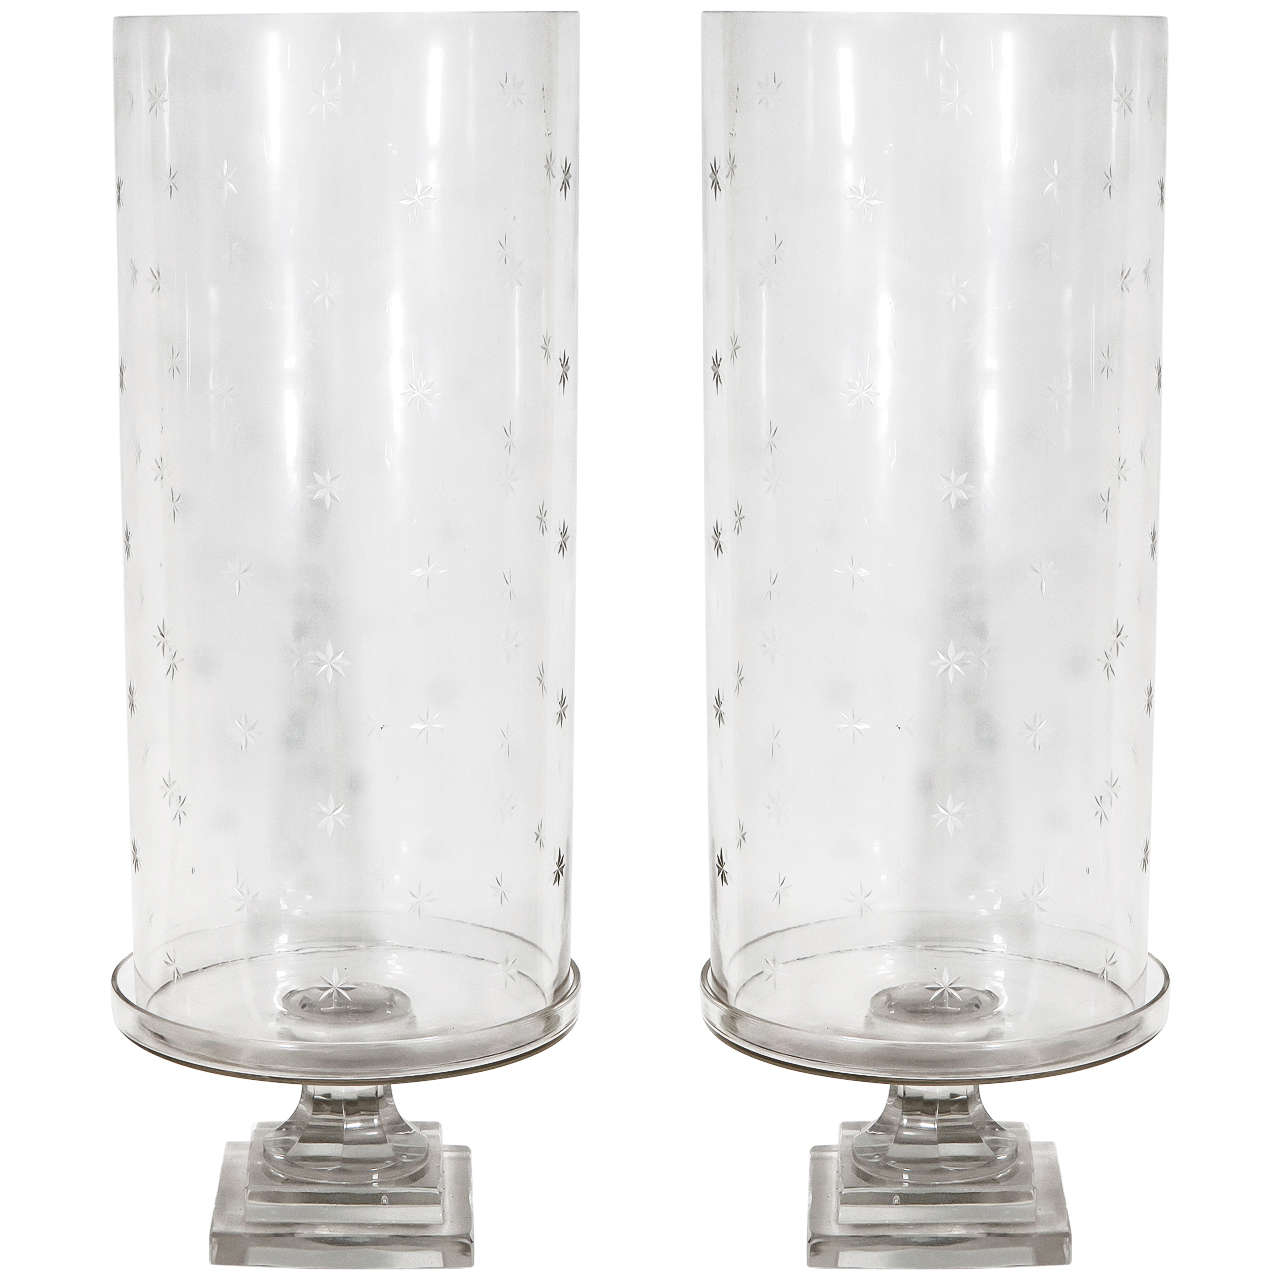 Pair of Tall Glass Hurricanes